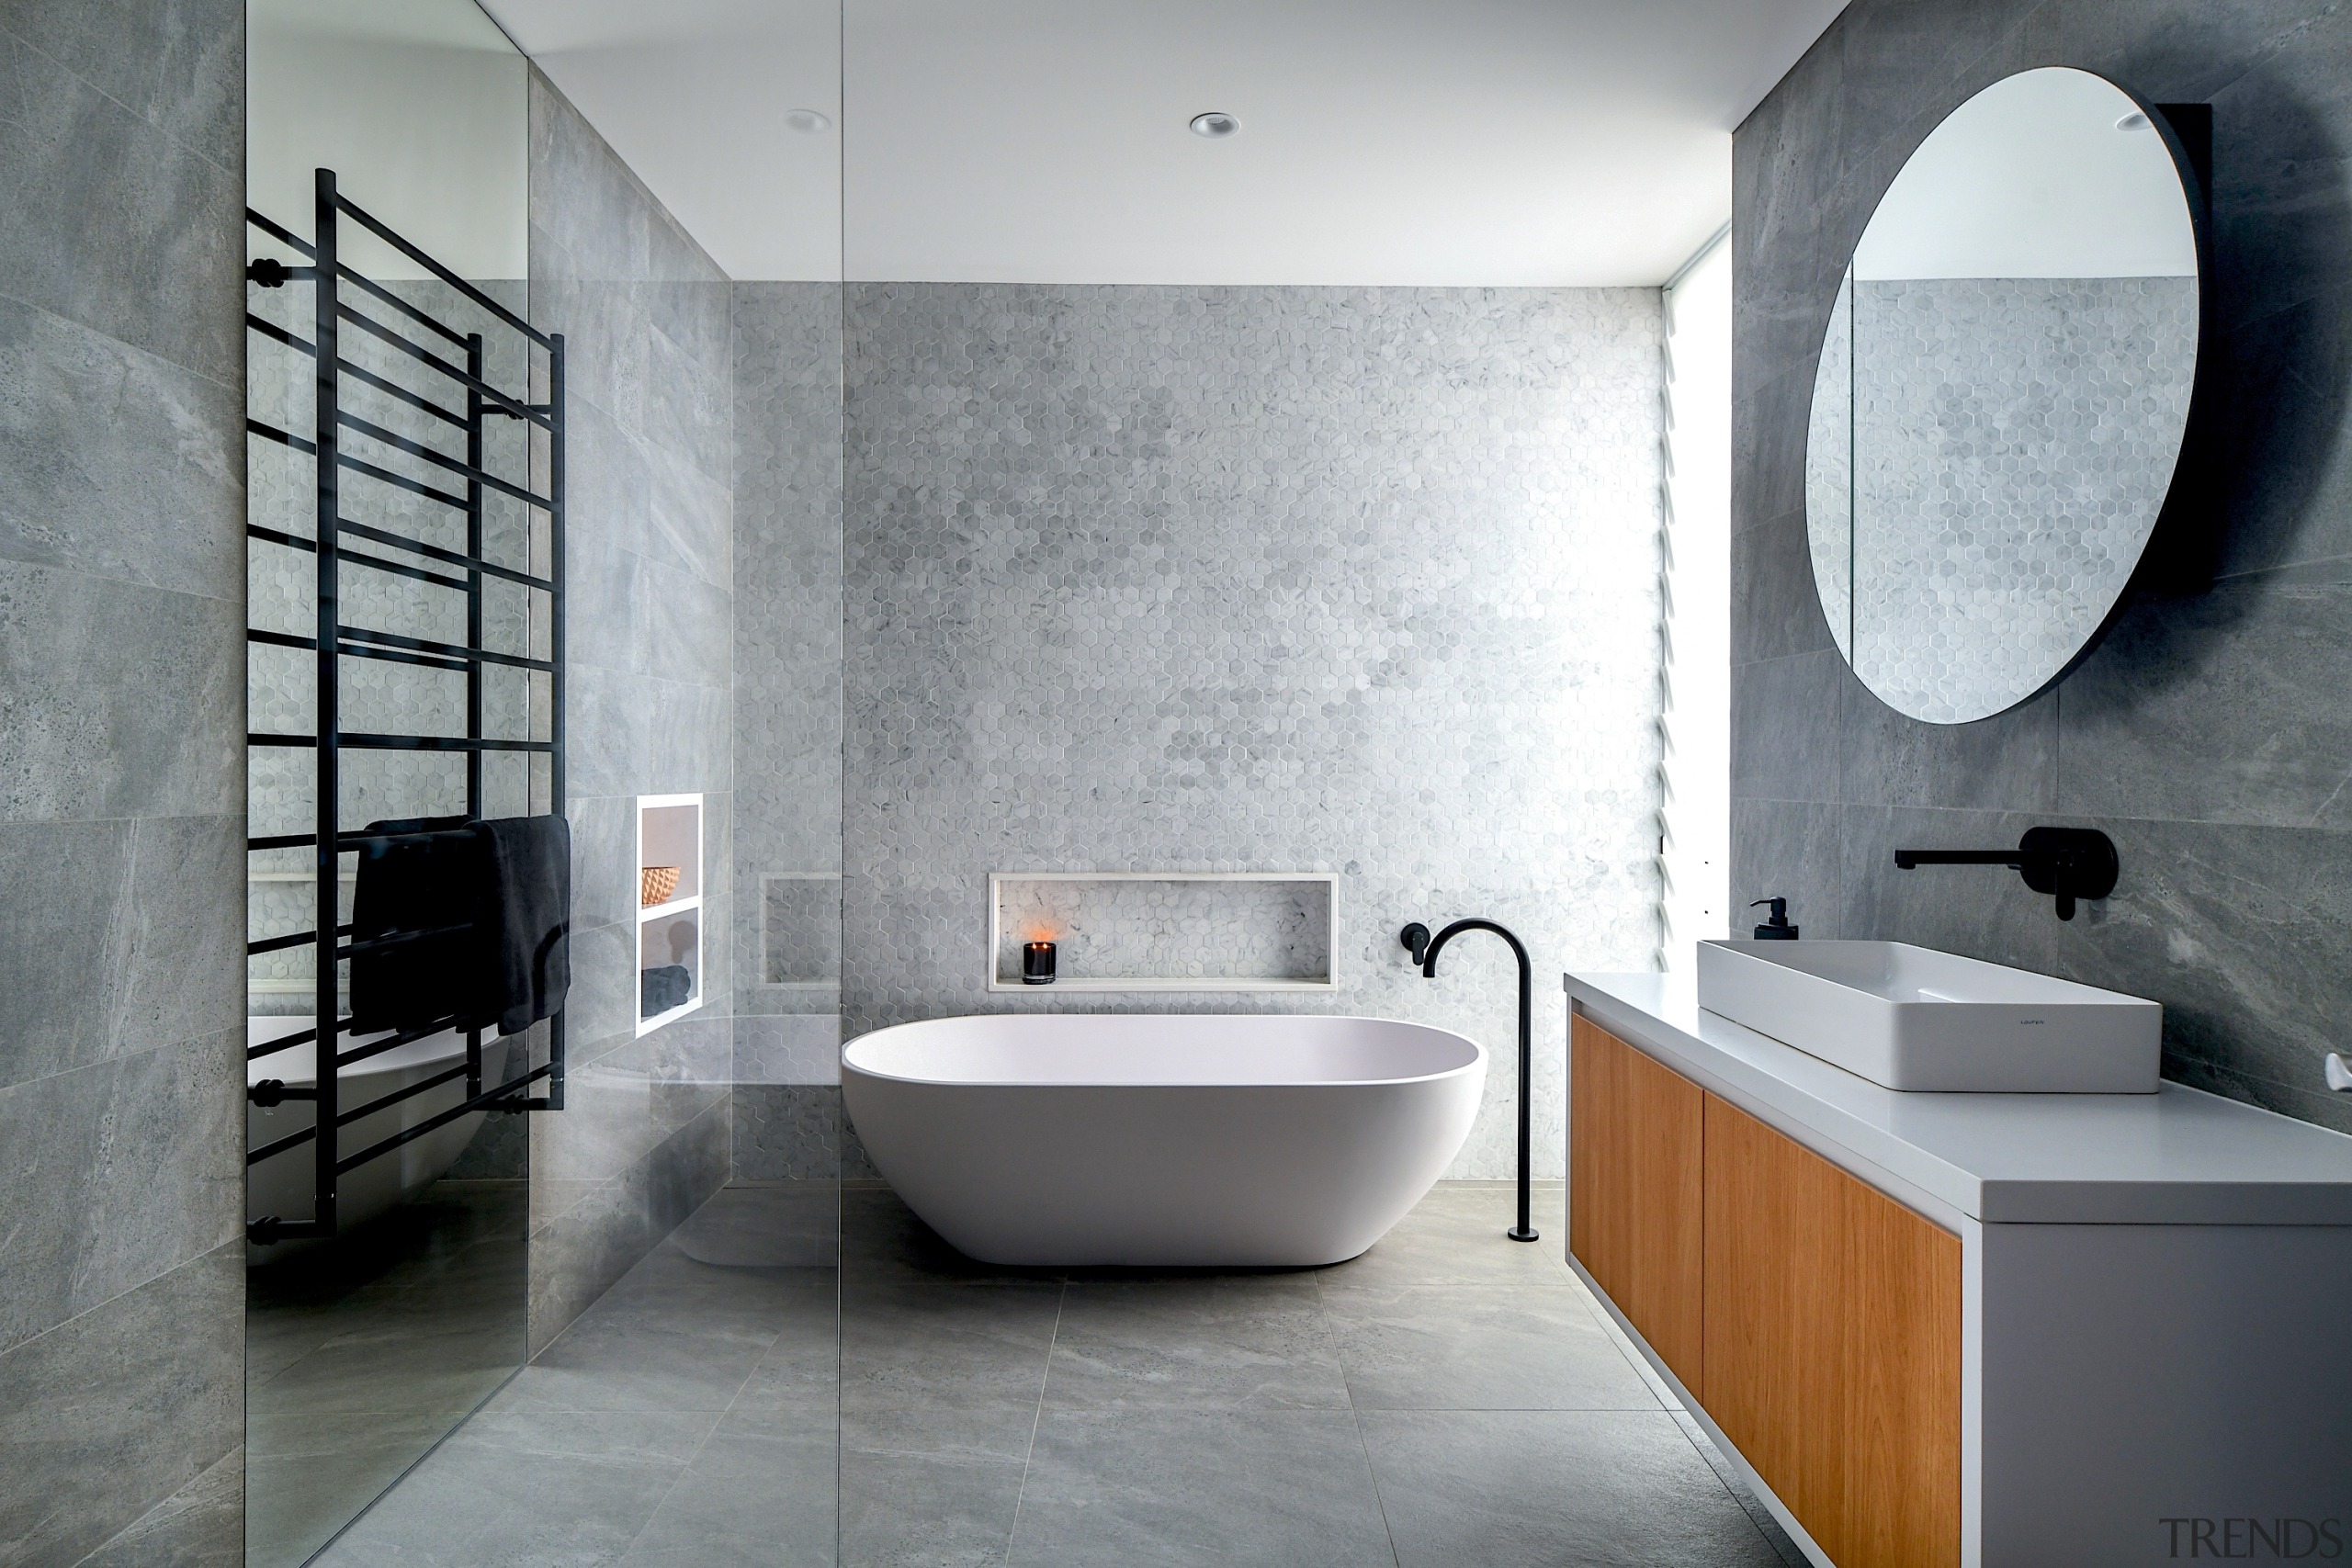 The Design Consultant – Highly Commended – 2019 architecture, bathroom, bathtub, bidet, building, ceramic, floor, flooring, house, interior design, material property, plumbing fixture, property, room, sink, tap, tile, wall, gray